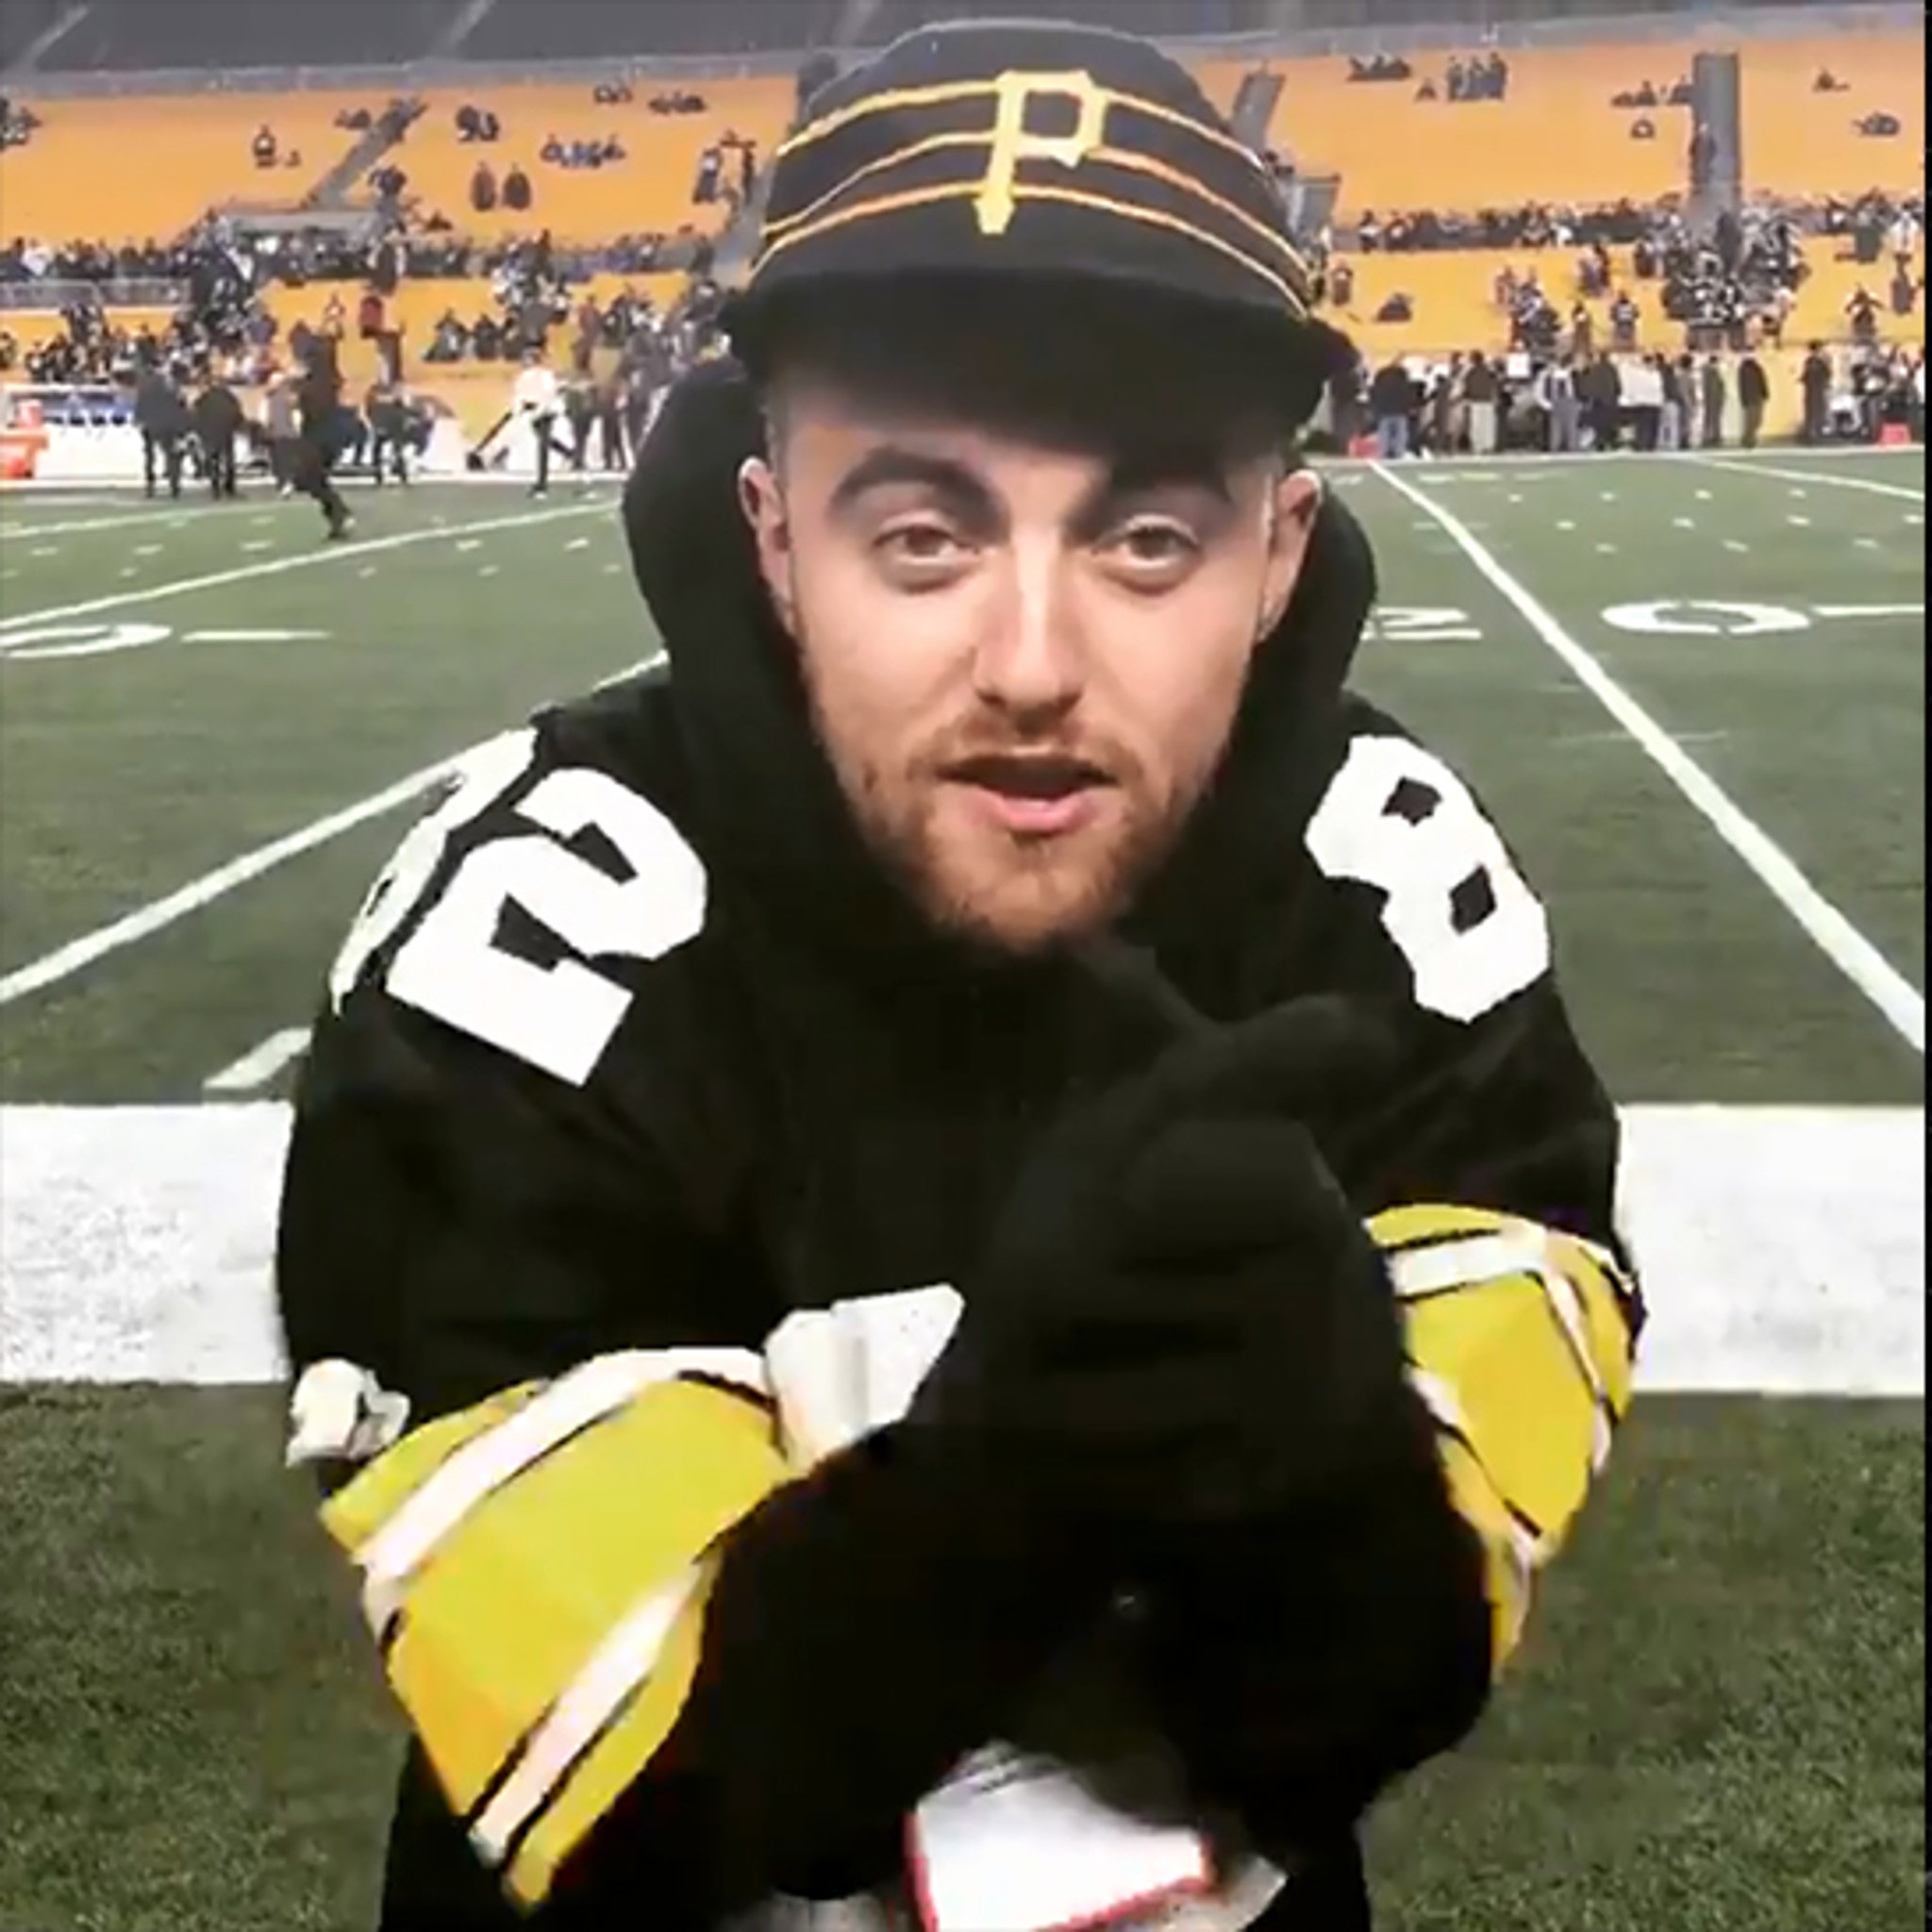 Mac Miller's Pittsburgh: Spots Mentioned In The Rapper's Music Through The  Years